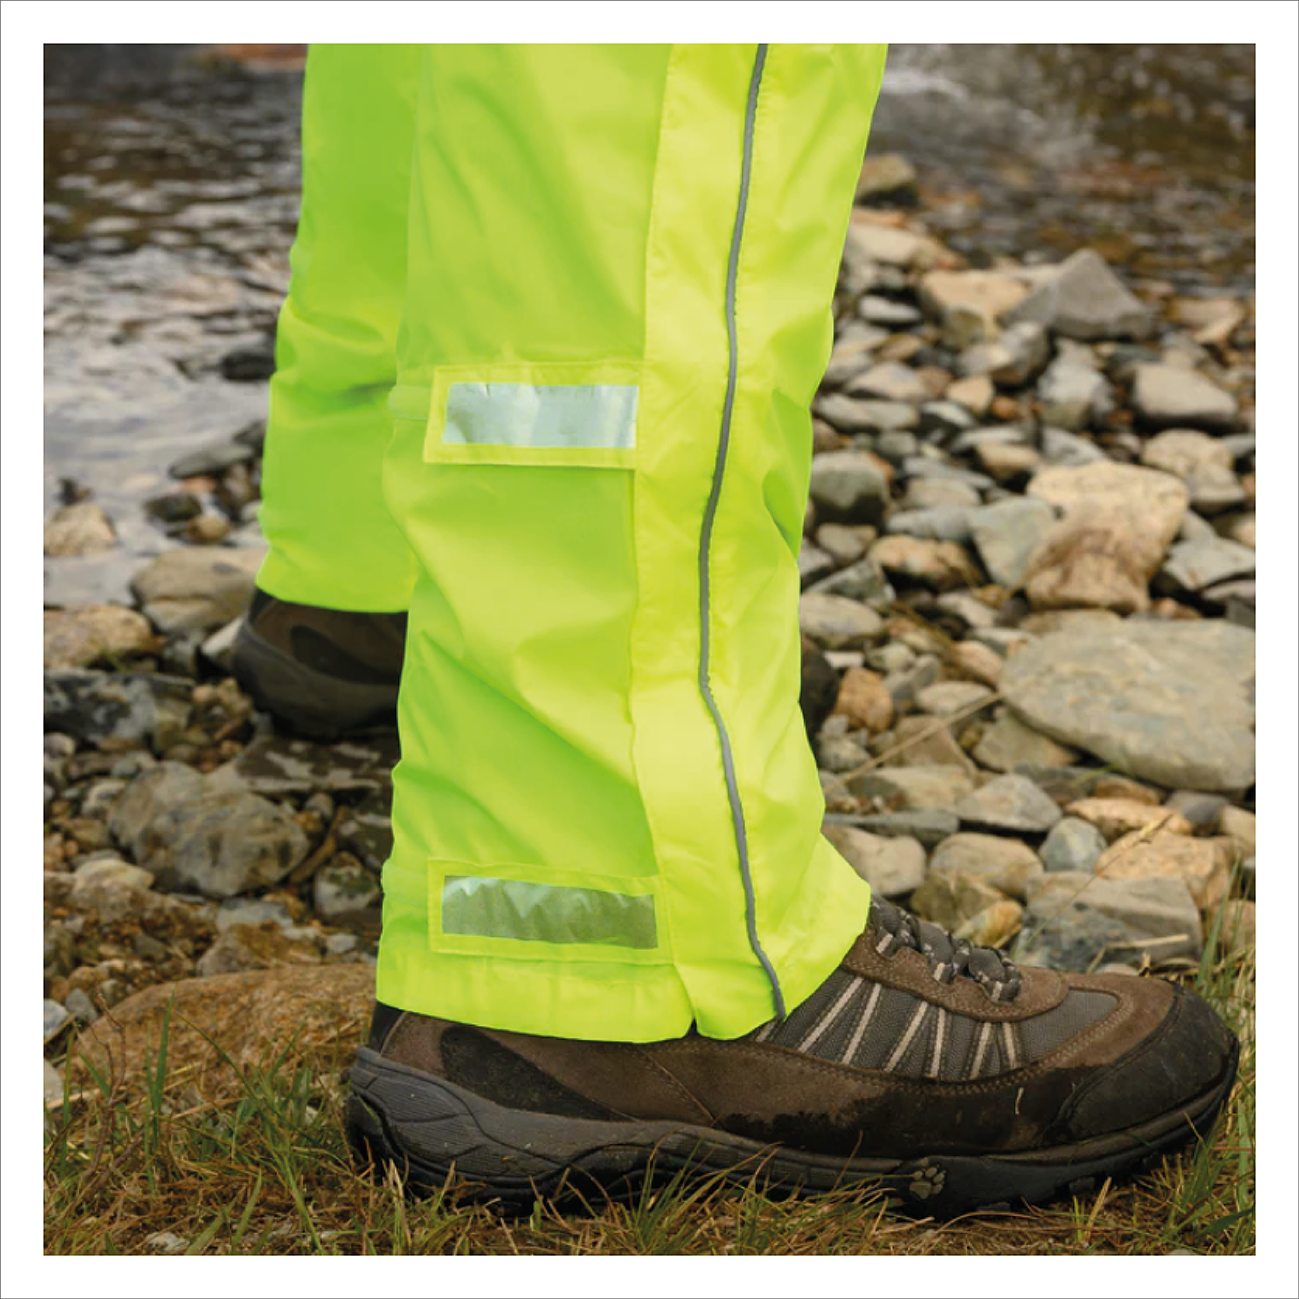 mac-in-a-sac - Waterproof Yellow Overtrousers Trousers (unisex - full zip)